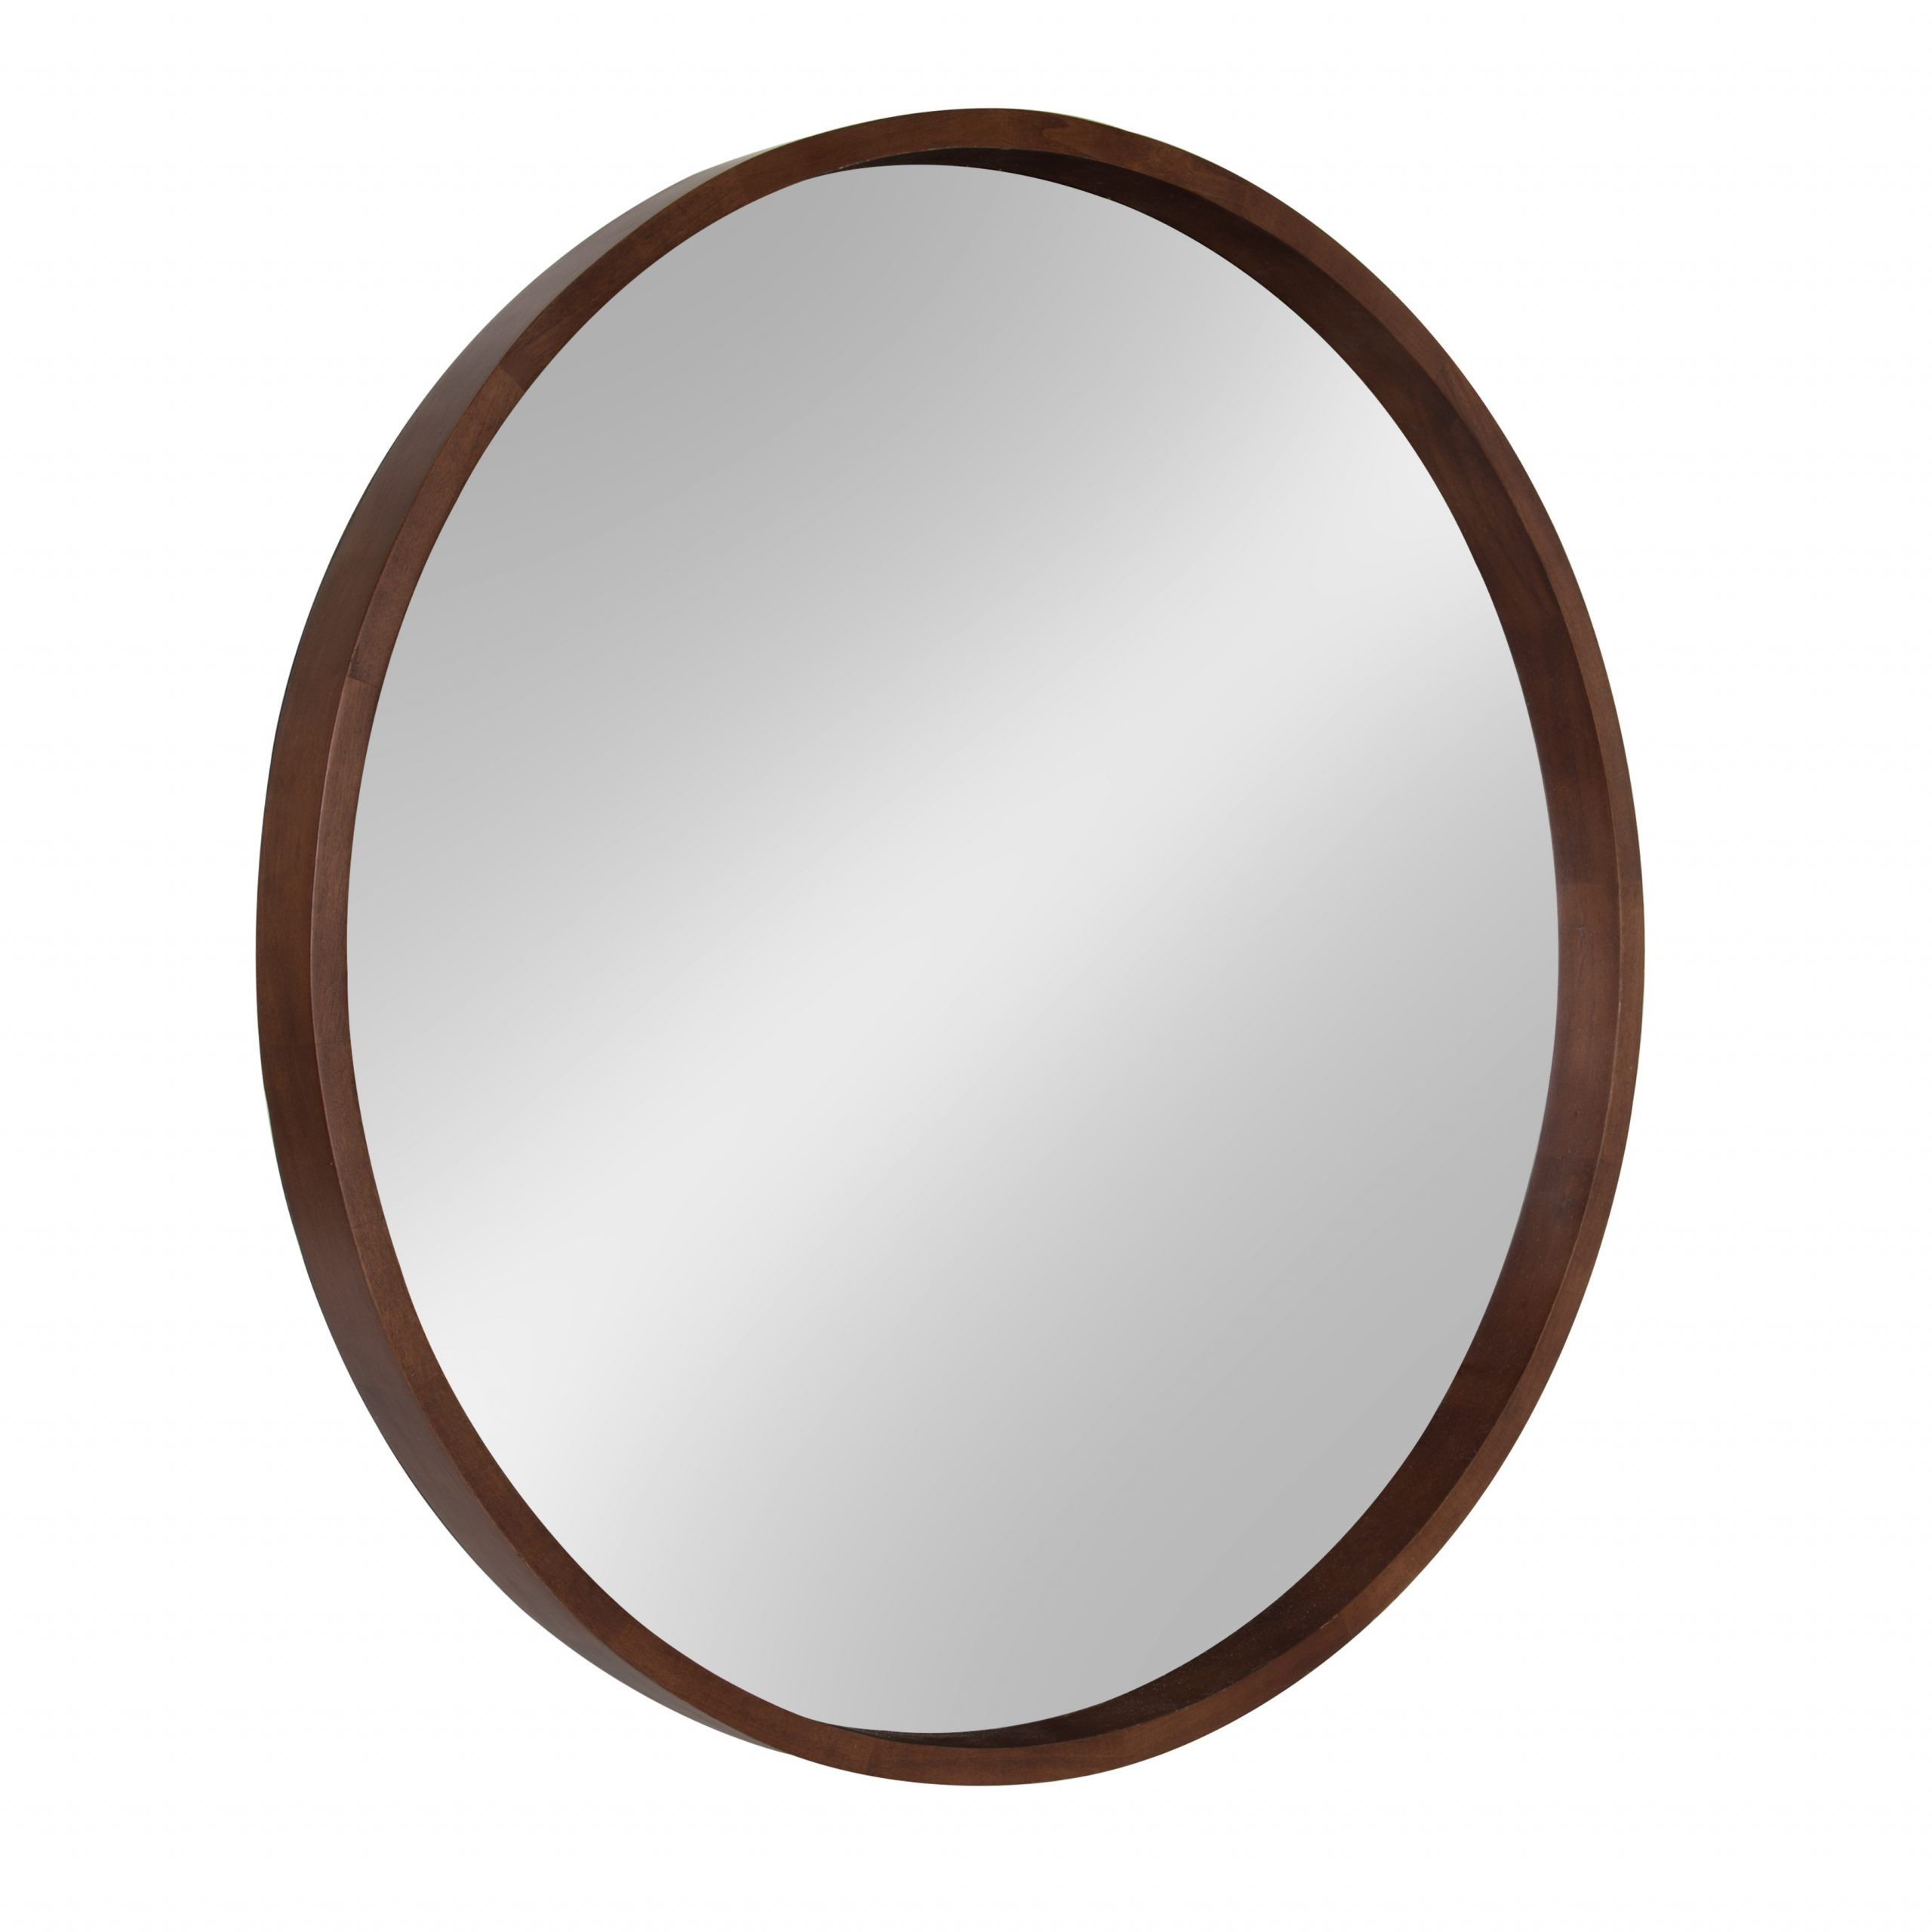 Kate And Laurel Hutton Round Decorative Wood Frame Wall Mirror, 30 Inch Regarding Walnut Wood Wall Mirrors (View 11 of 15)